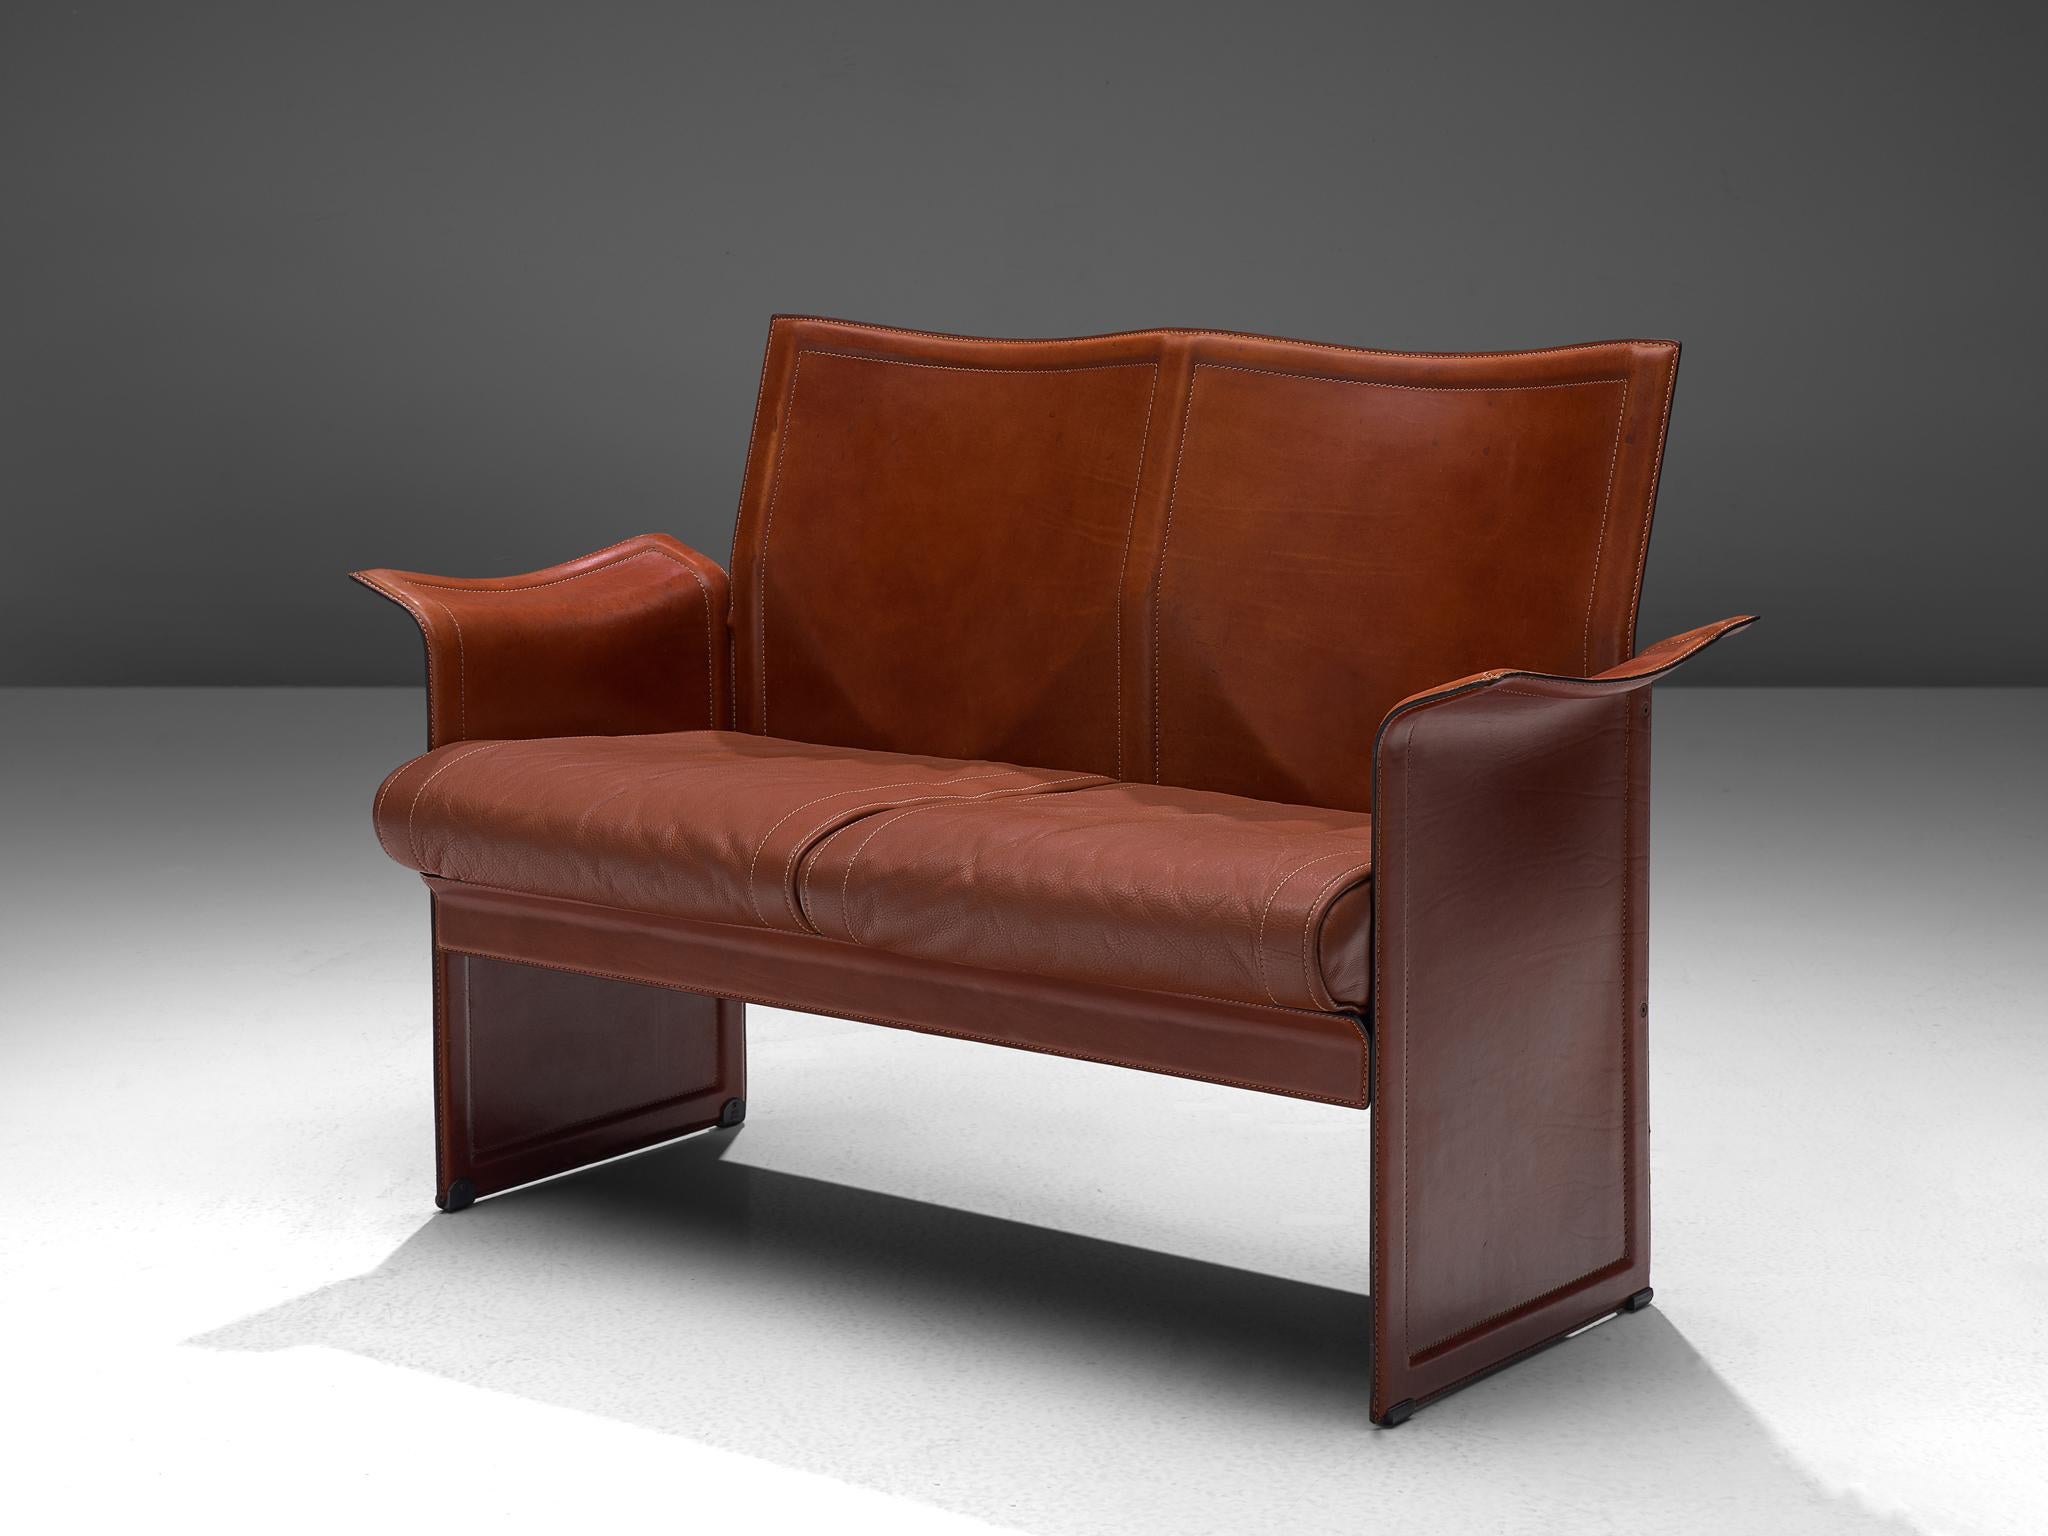 Tito Agnoli for Matteo Grassi, 'Korium' sofa, leather, steel Italy, 1970s

This sophisticated iconic 'Korium' cognac leather sofa was designed by Tito Agnoli for Matteo Grassi. It features a strong structure, with a wing like appearance and timeless